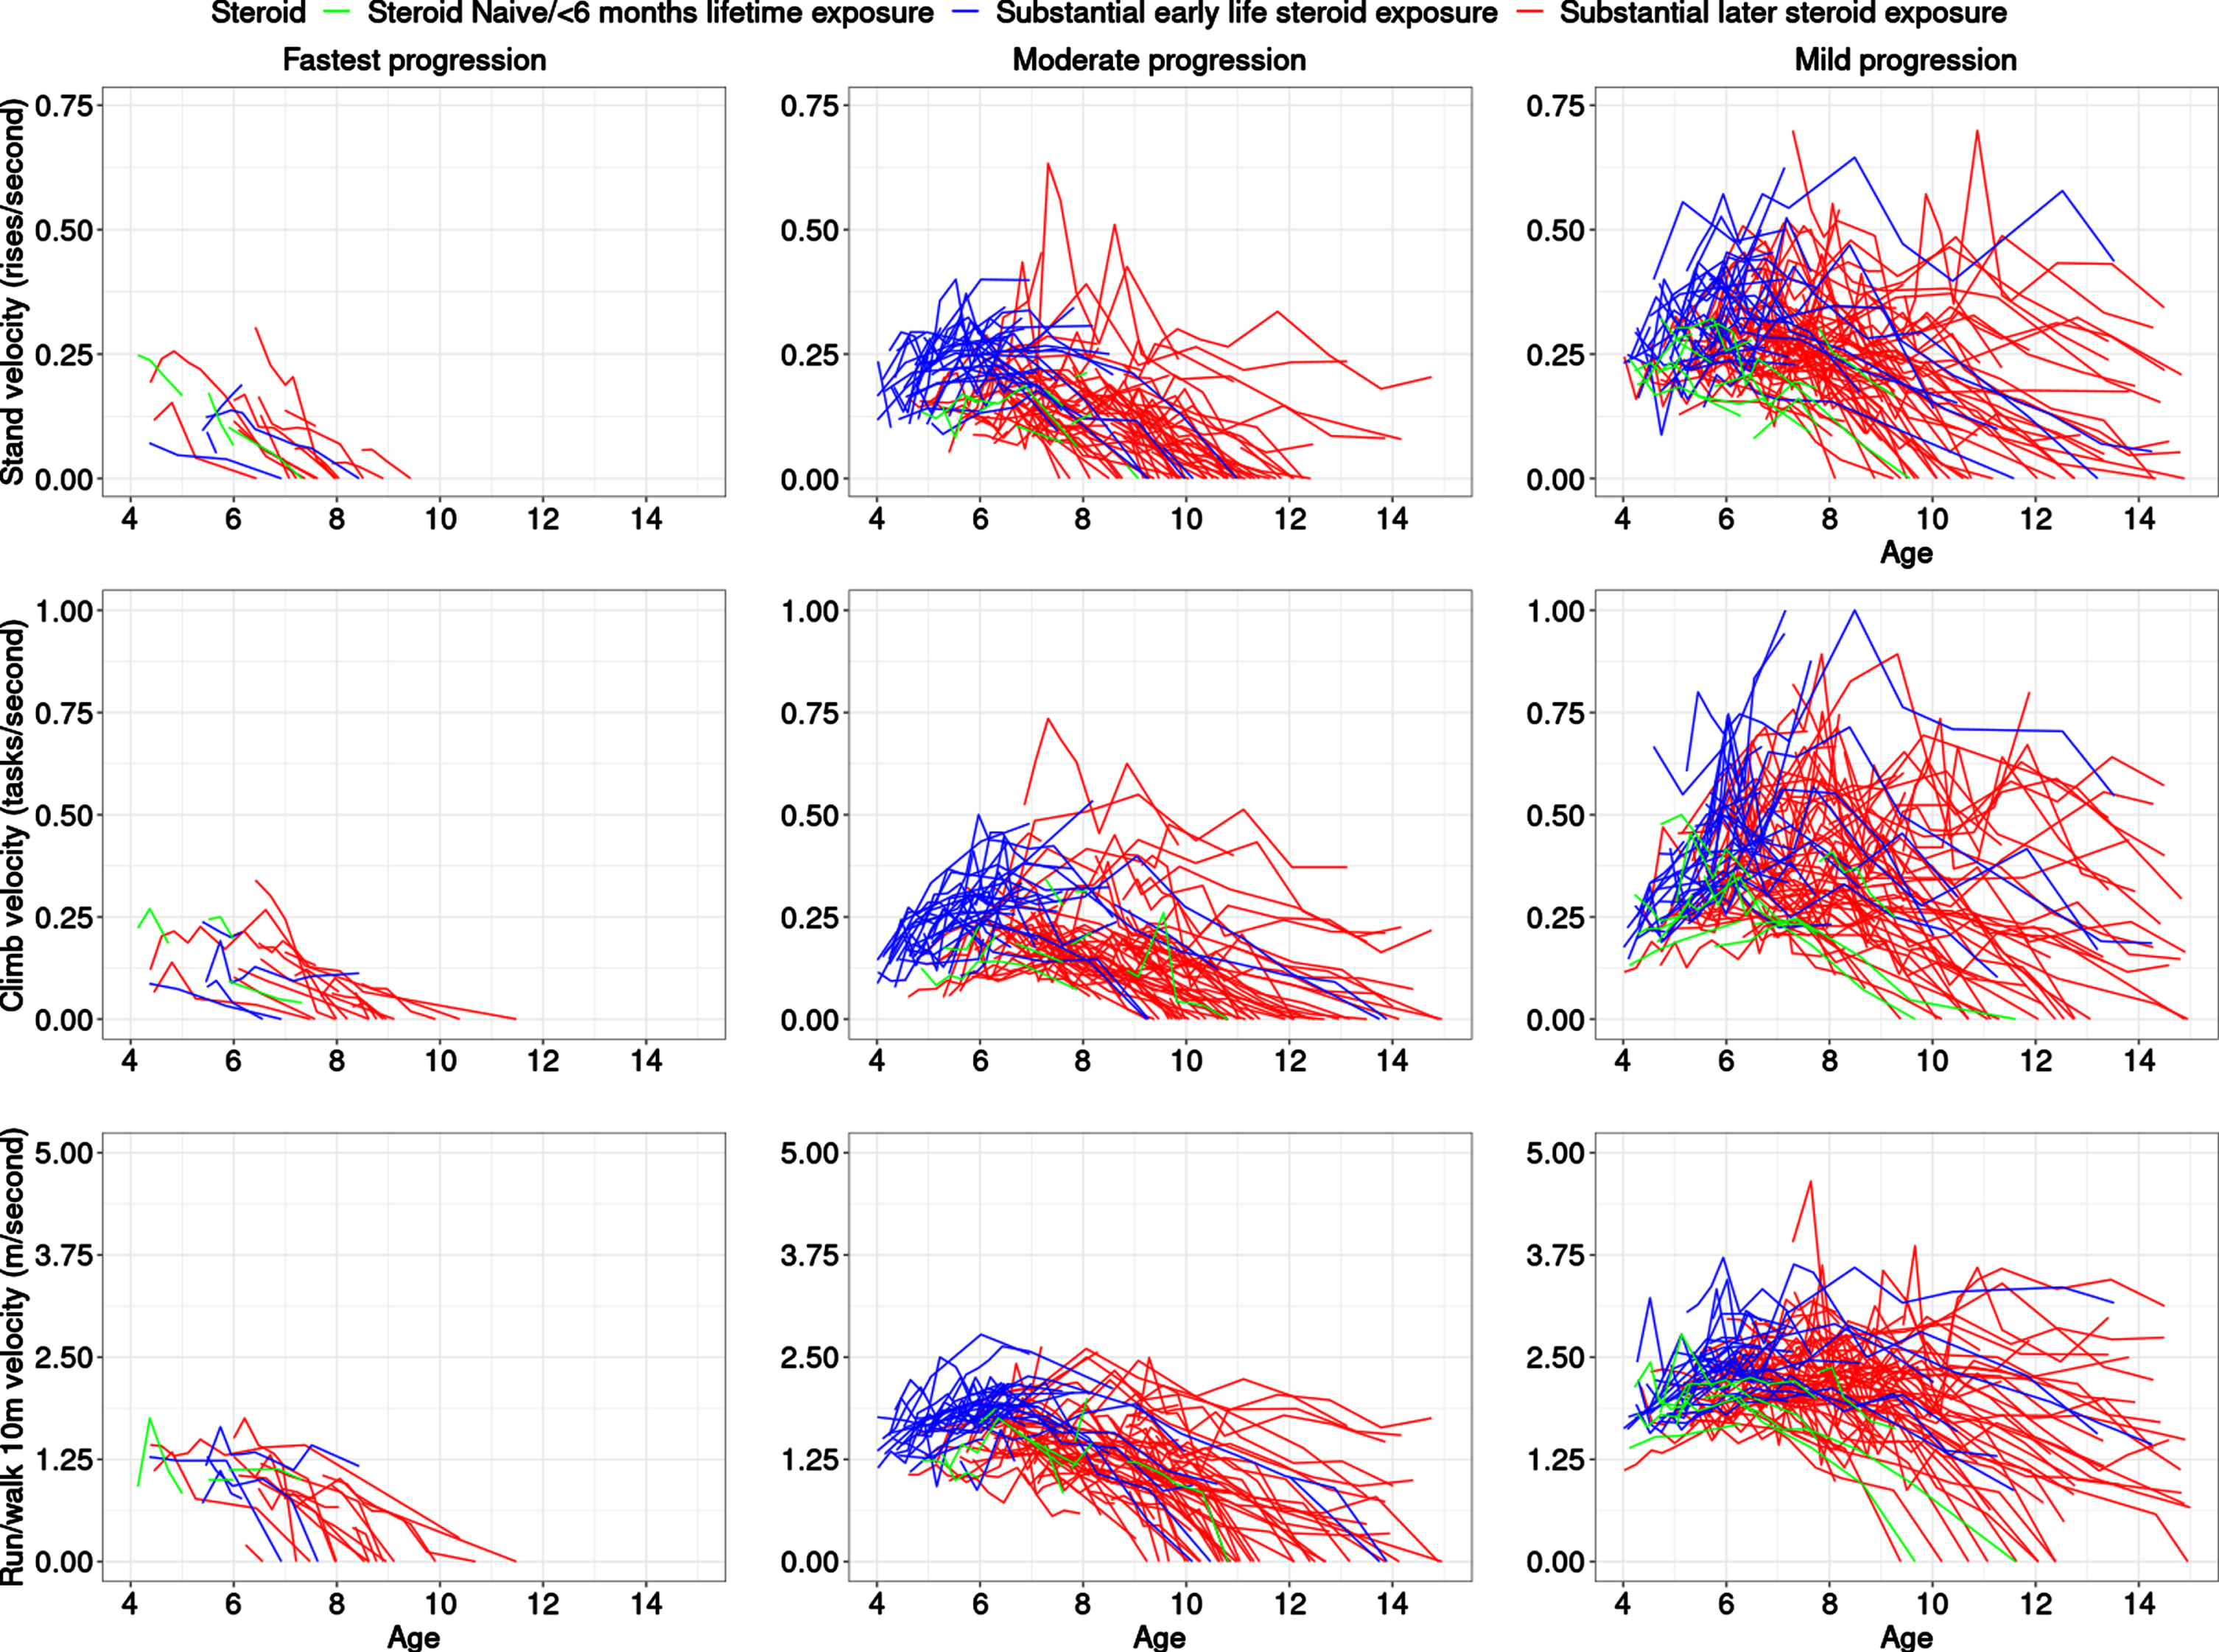 Trajectories highlighted in colors representing steroid status. The top, middle, and bottom rows are for TTSTAND, TTCLIMB, and TTRW velocities, respectively. Subpanels from left to right are for Cluster 1: fastest progressing DMD with a more rapid decline of motor outcomes, then Cluster 2 with a more moderate progression, followed by Cluster 3 with the slowest progression. The legend shows the three-levels of the steroid status with the following levels: naïve throughout (green), greater than 6 months exposure to steroids after 6 years (red), and greater than 6 months exposure to steroids prior to 6 years (blue). The x-axis is truncated at 15 years. Abbreviations: DMD: Duchenne muscular dystrophy; TTSTAND: time to stand from supine; TTCLIMB: time to climb four steps; TTRW: time to run/walk 10m.